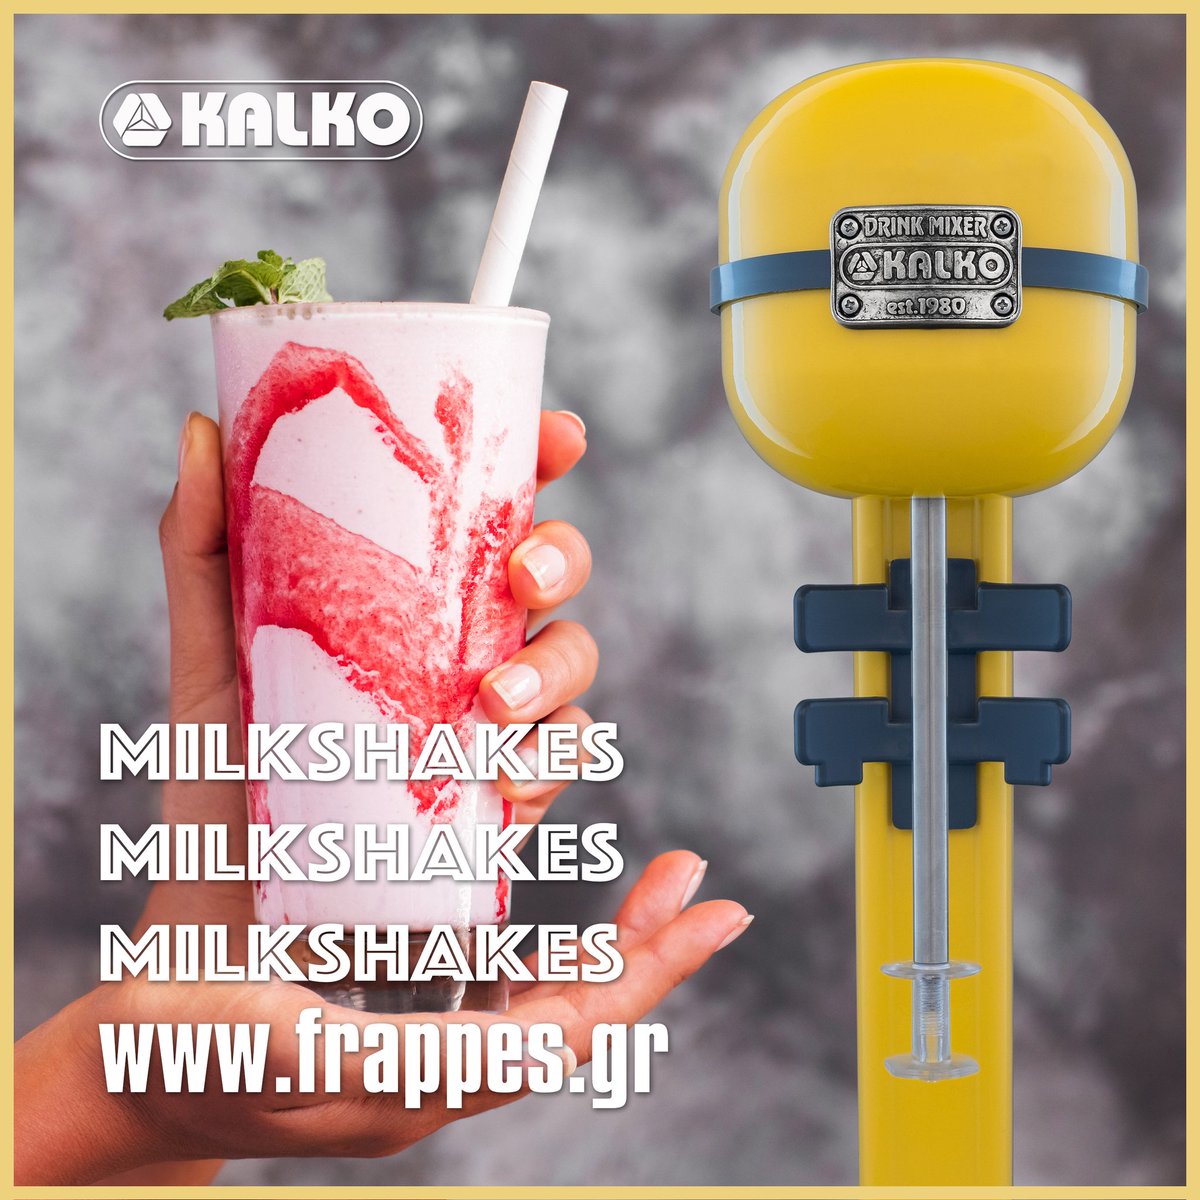 Making Frappe with the Kalko drink mixer